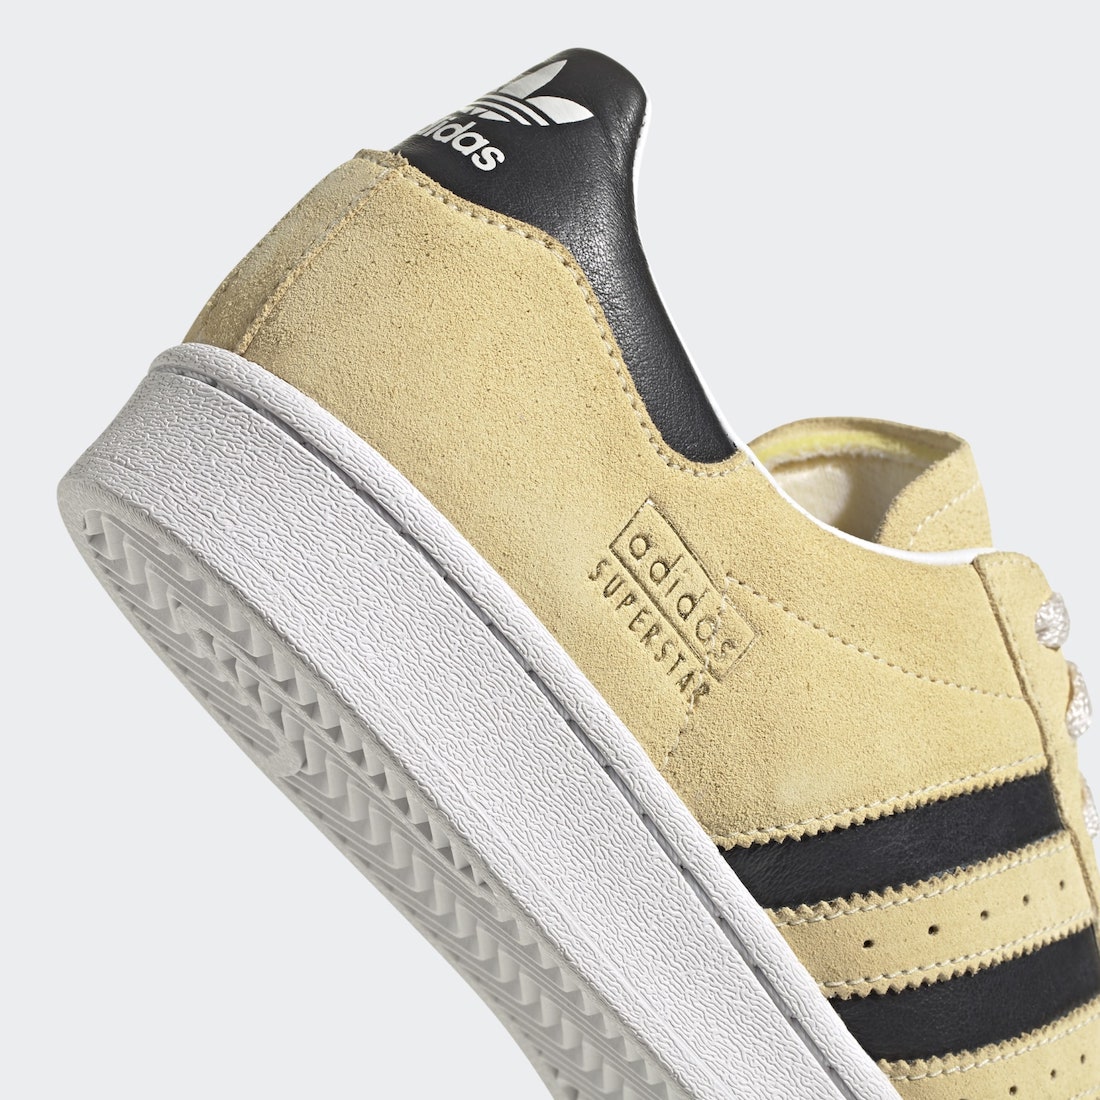 adidas Superstar Easy Yellow H68176 Release Date